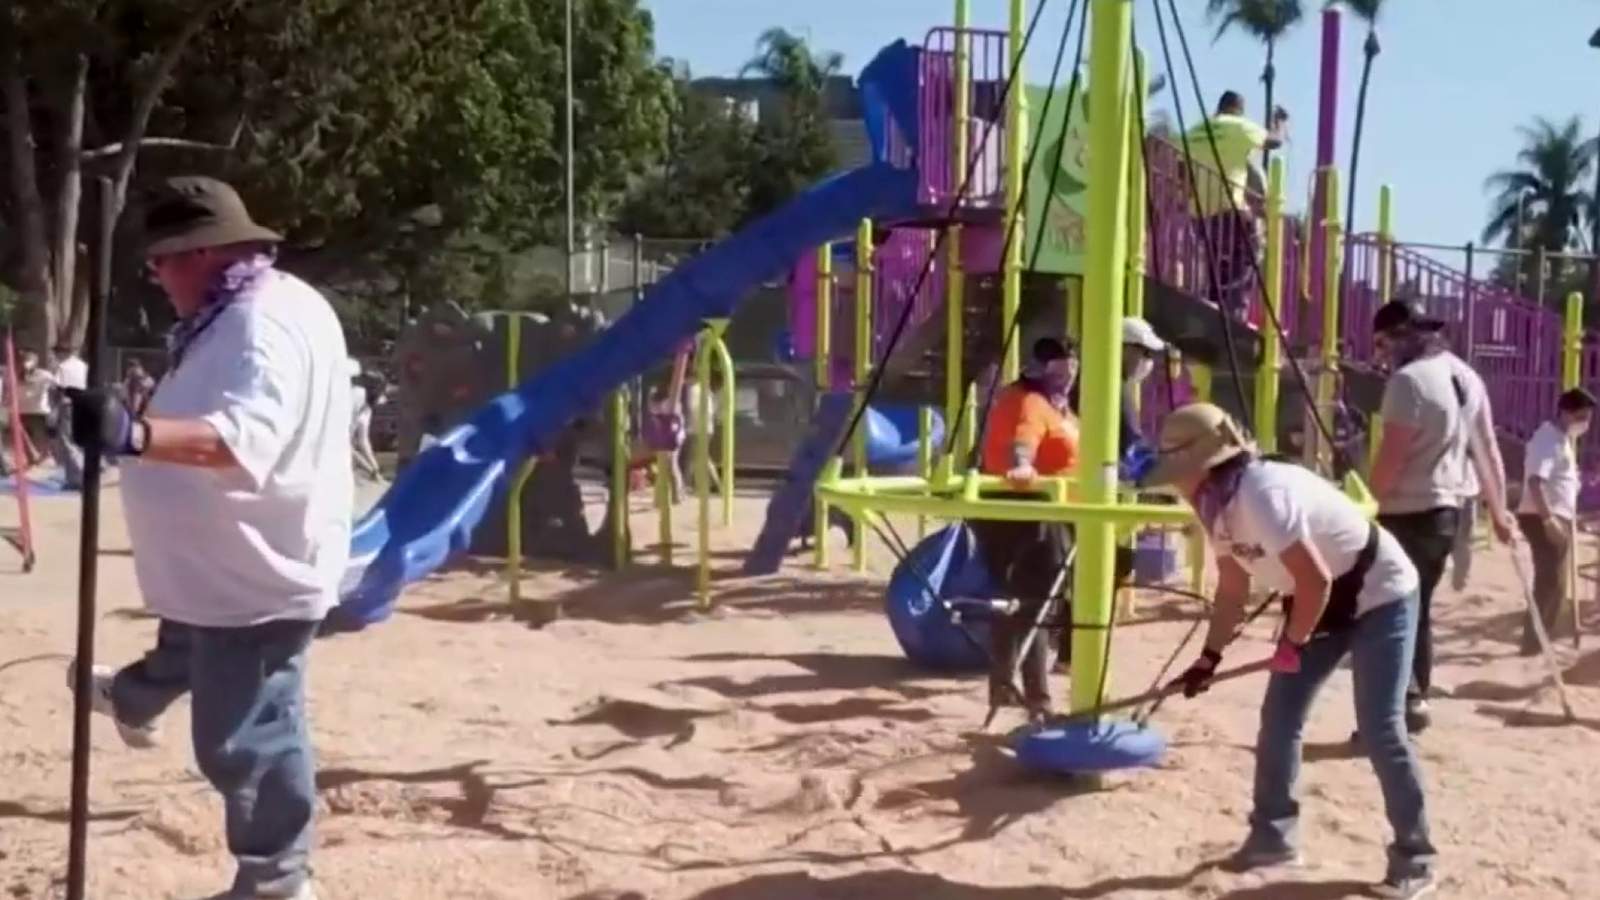 US nonprofit brings safe playgrounds to underserved communities